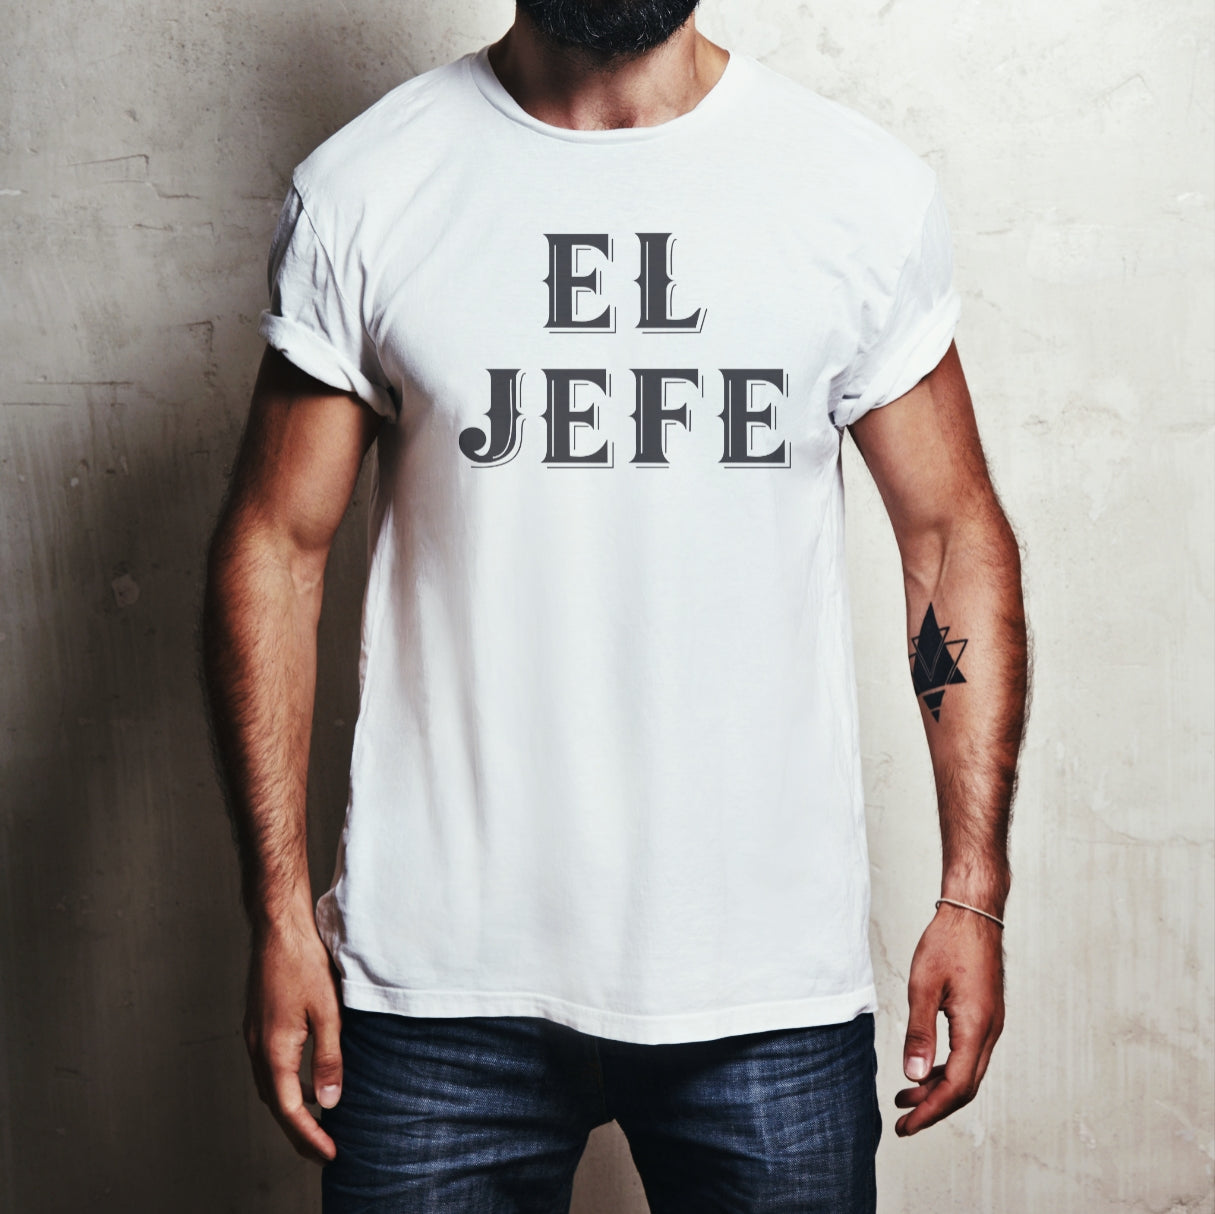 latino man wearing a  White t-shirt with black Old English lettering reading 'EL JEFE'